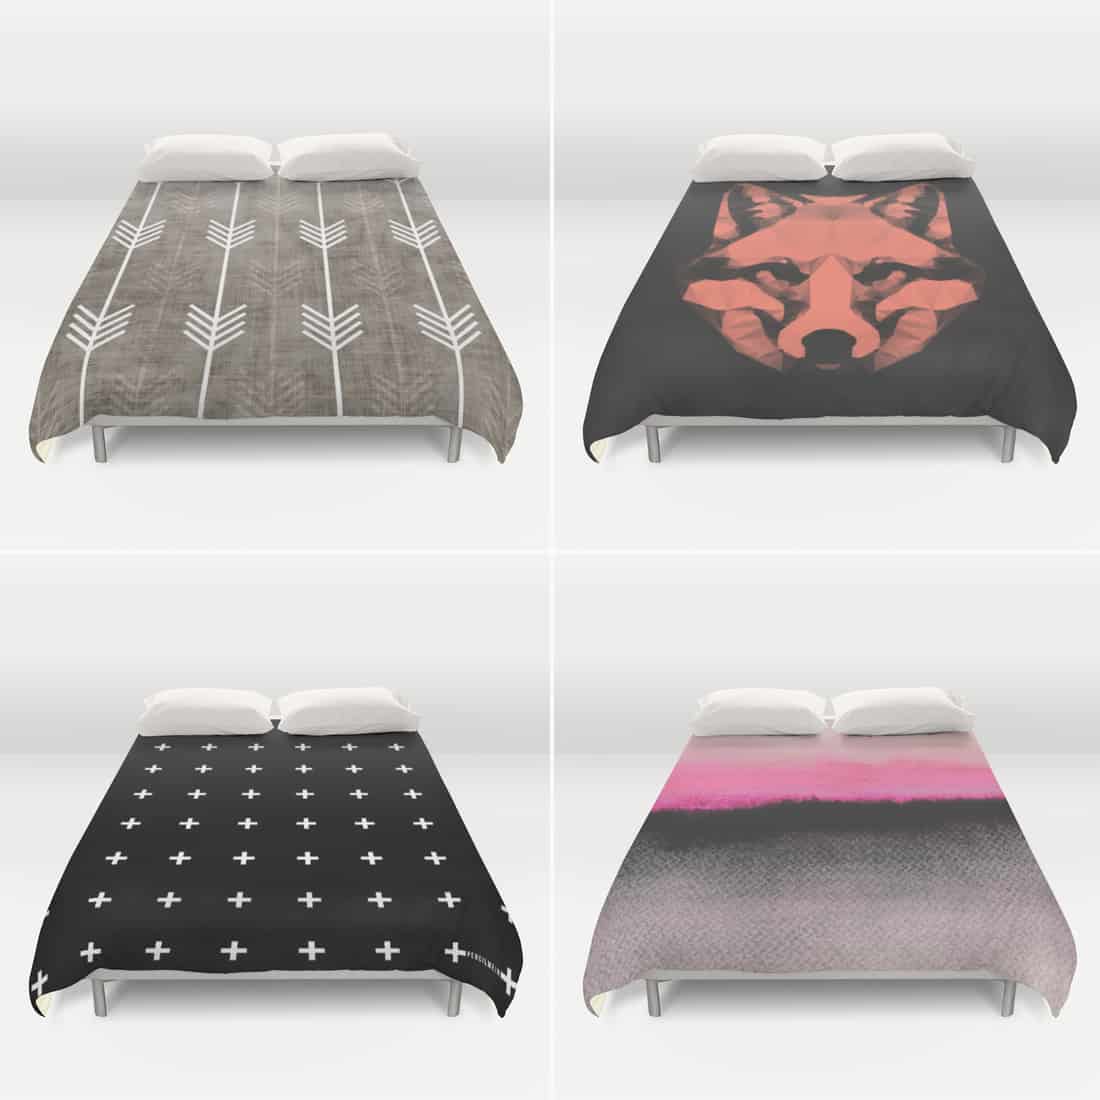 Artistic Duvet Covers Made On Demand At Society6